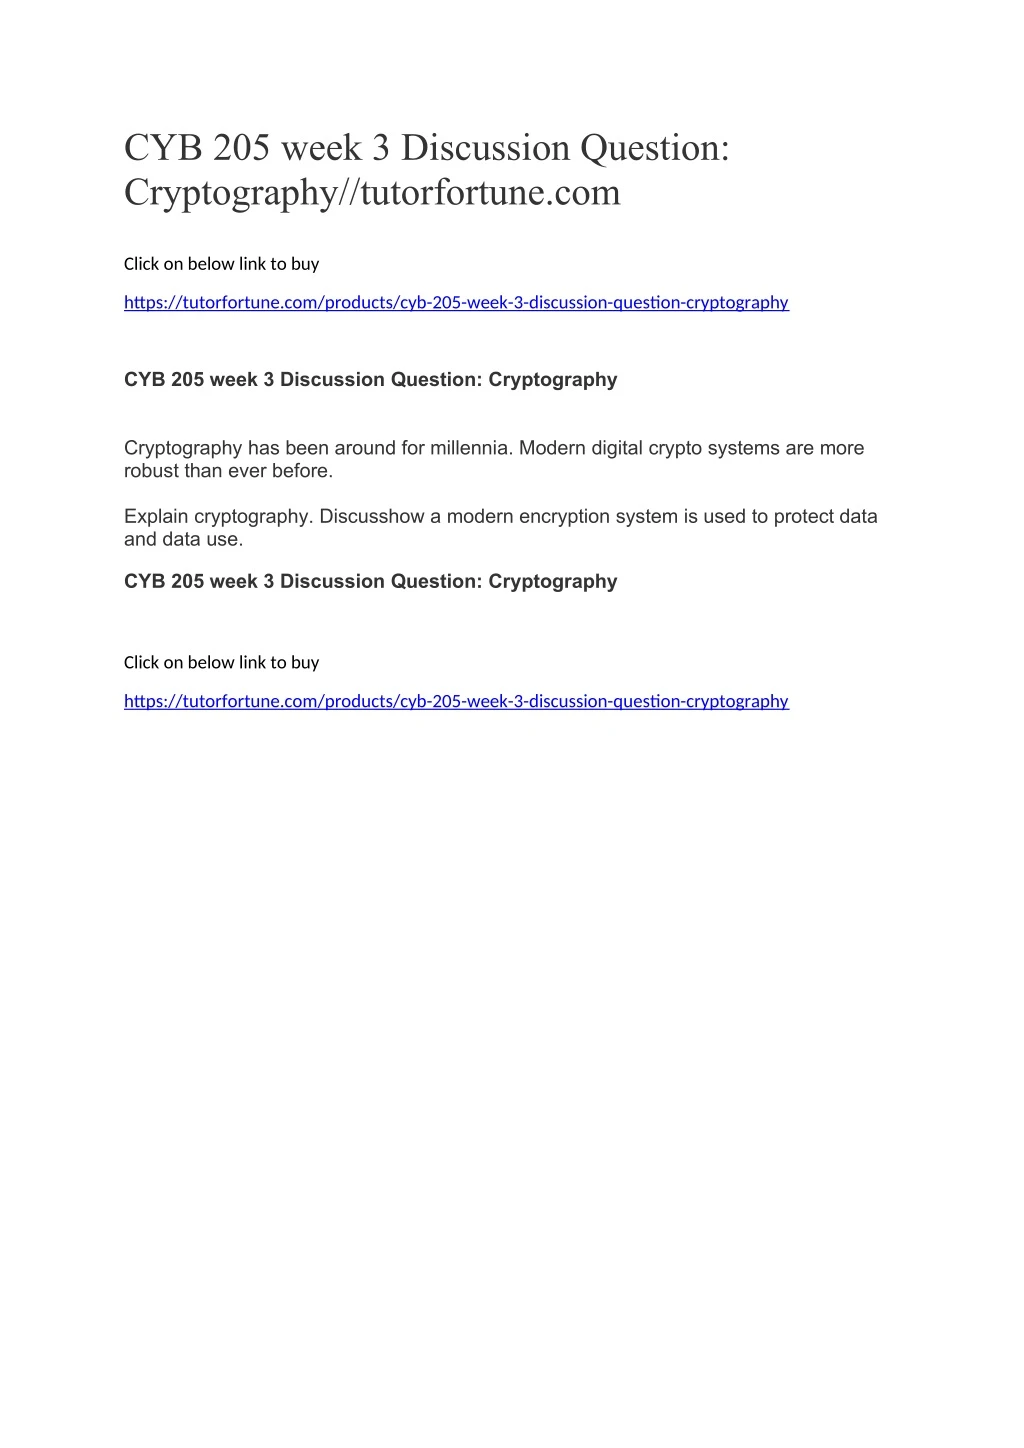 cyb 205 week 3 discussion question cryptography